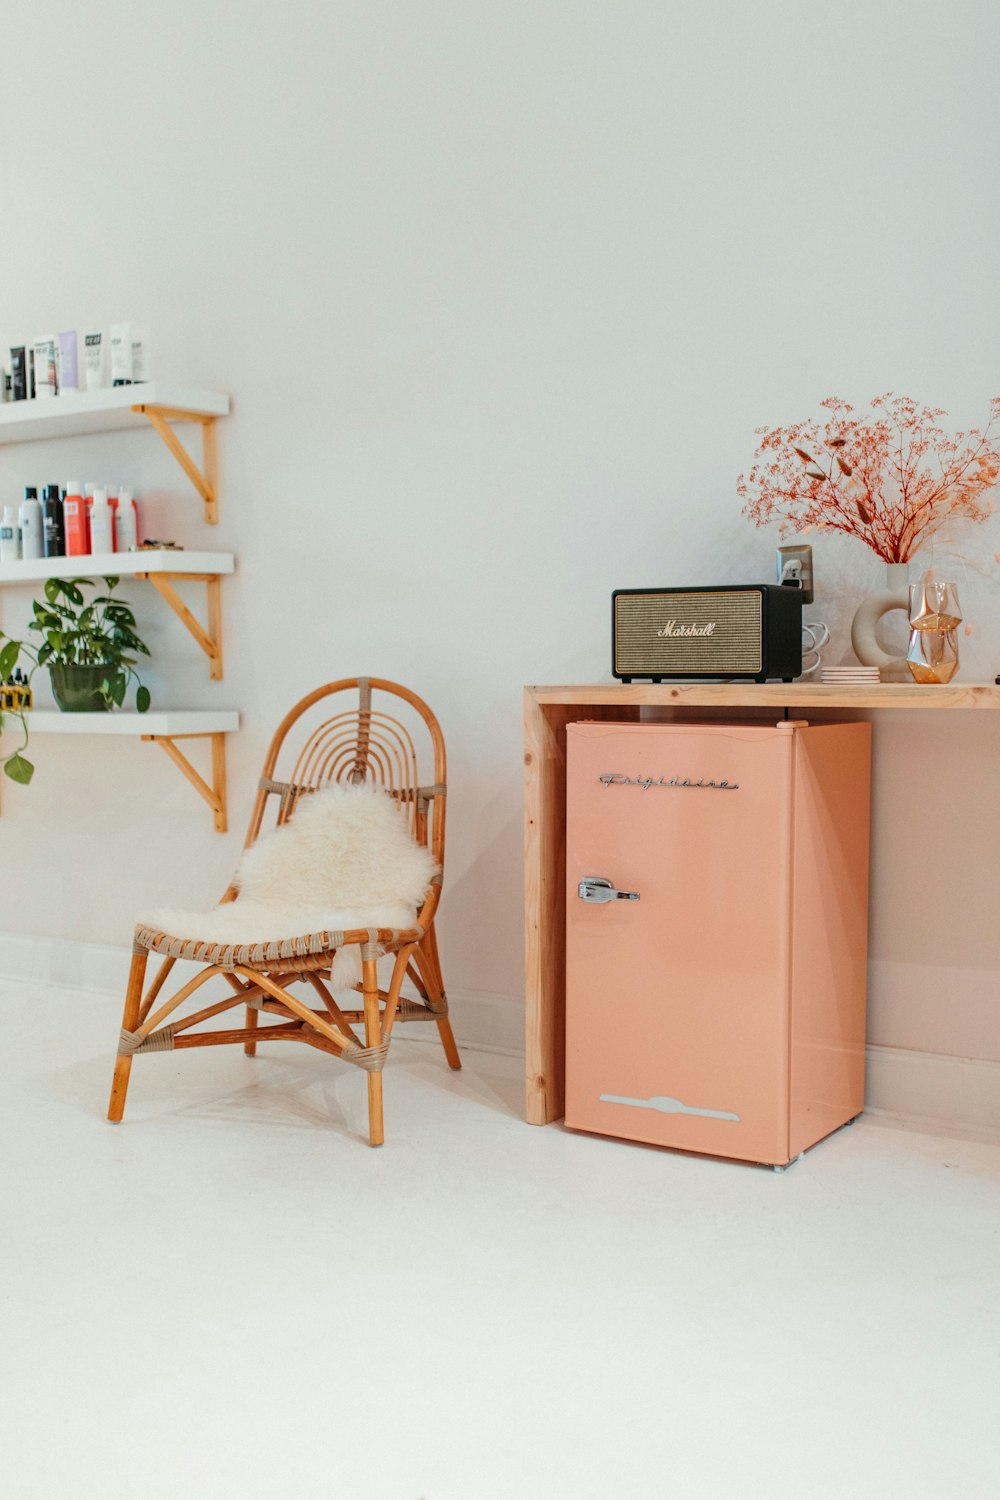 a pink refrigerator sitting next to a wooden chair